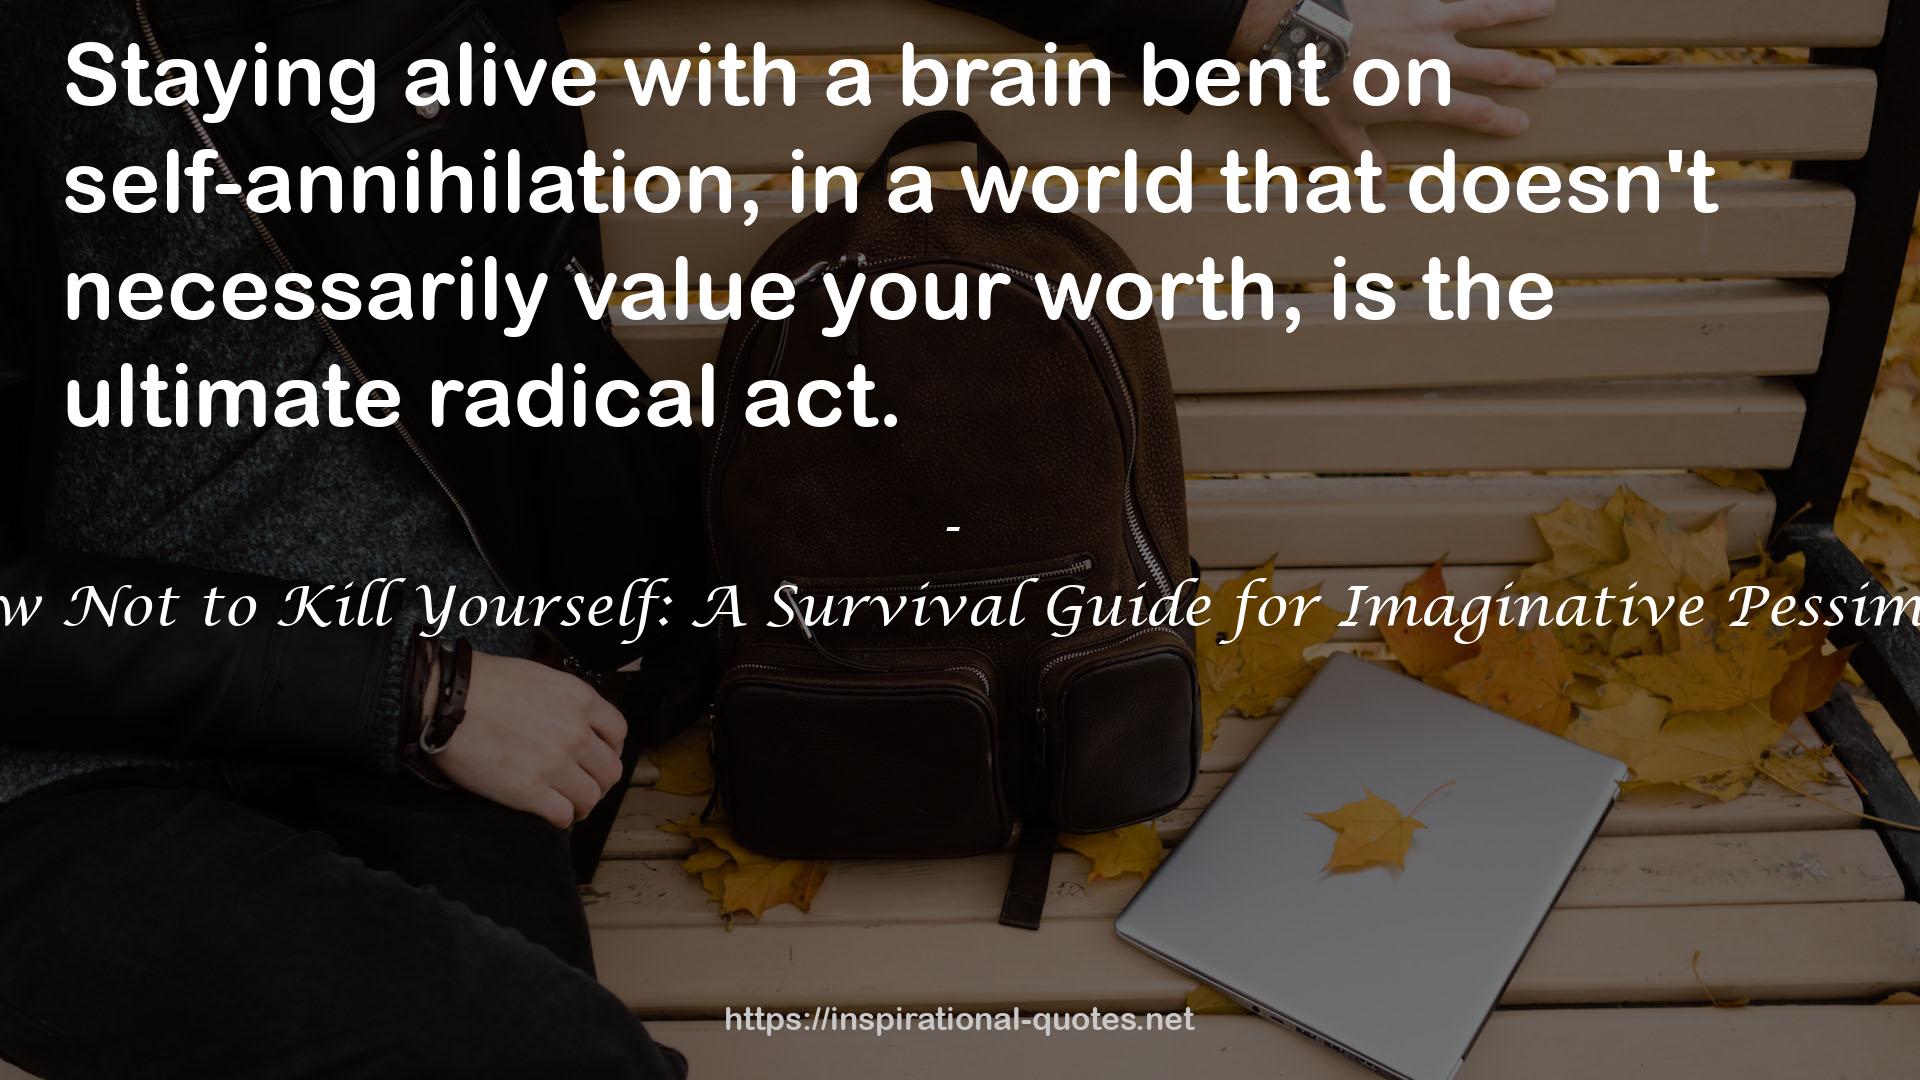 How Not to Kill Yourself: A Survival Guide for Imaginative Pessimists QUOTES